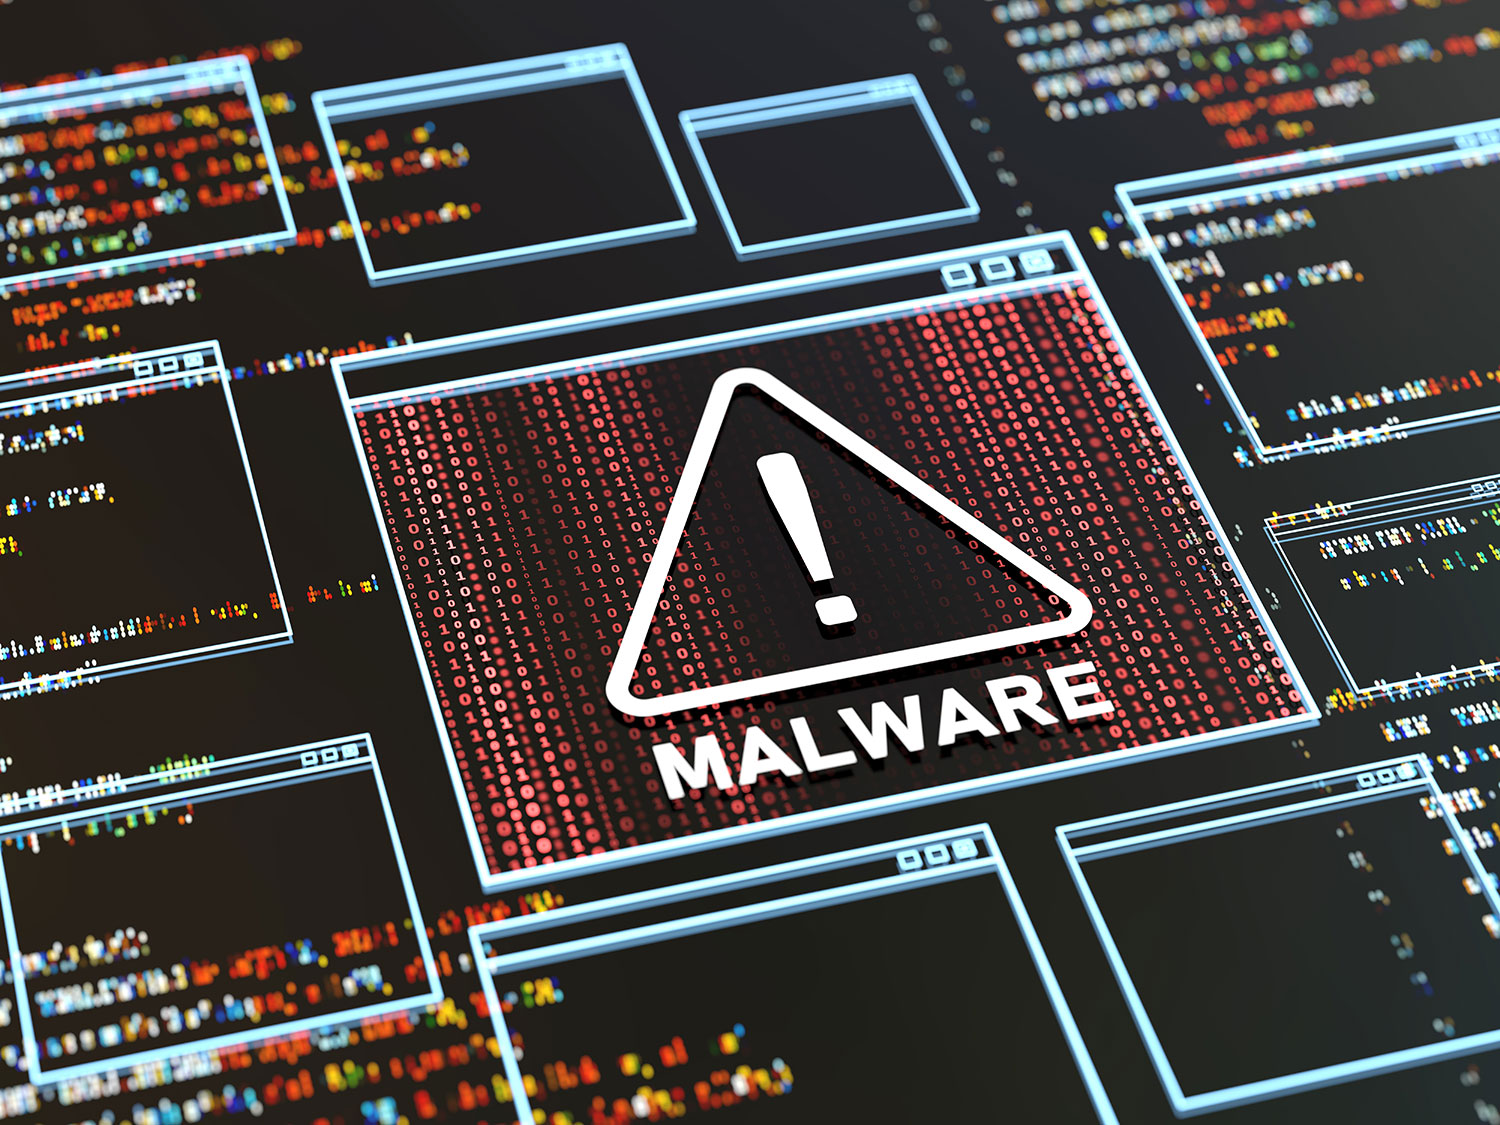 Malware Getty Images